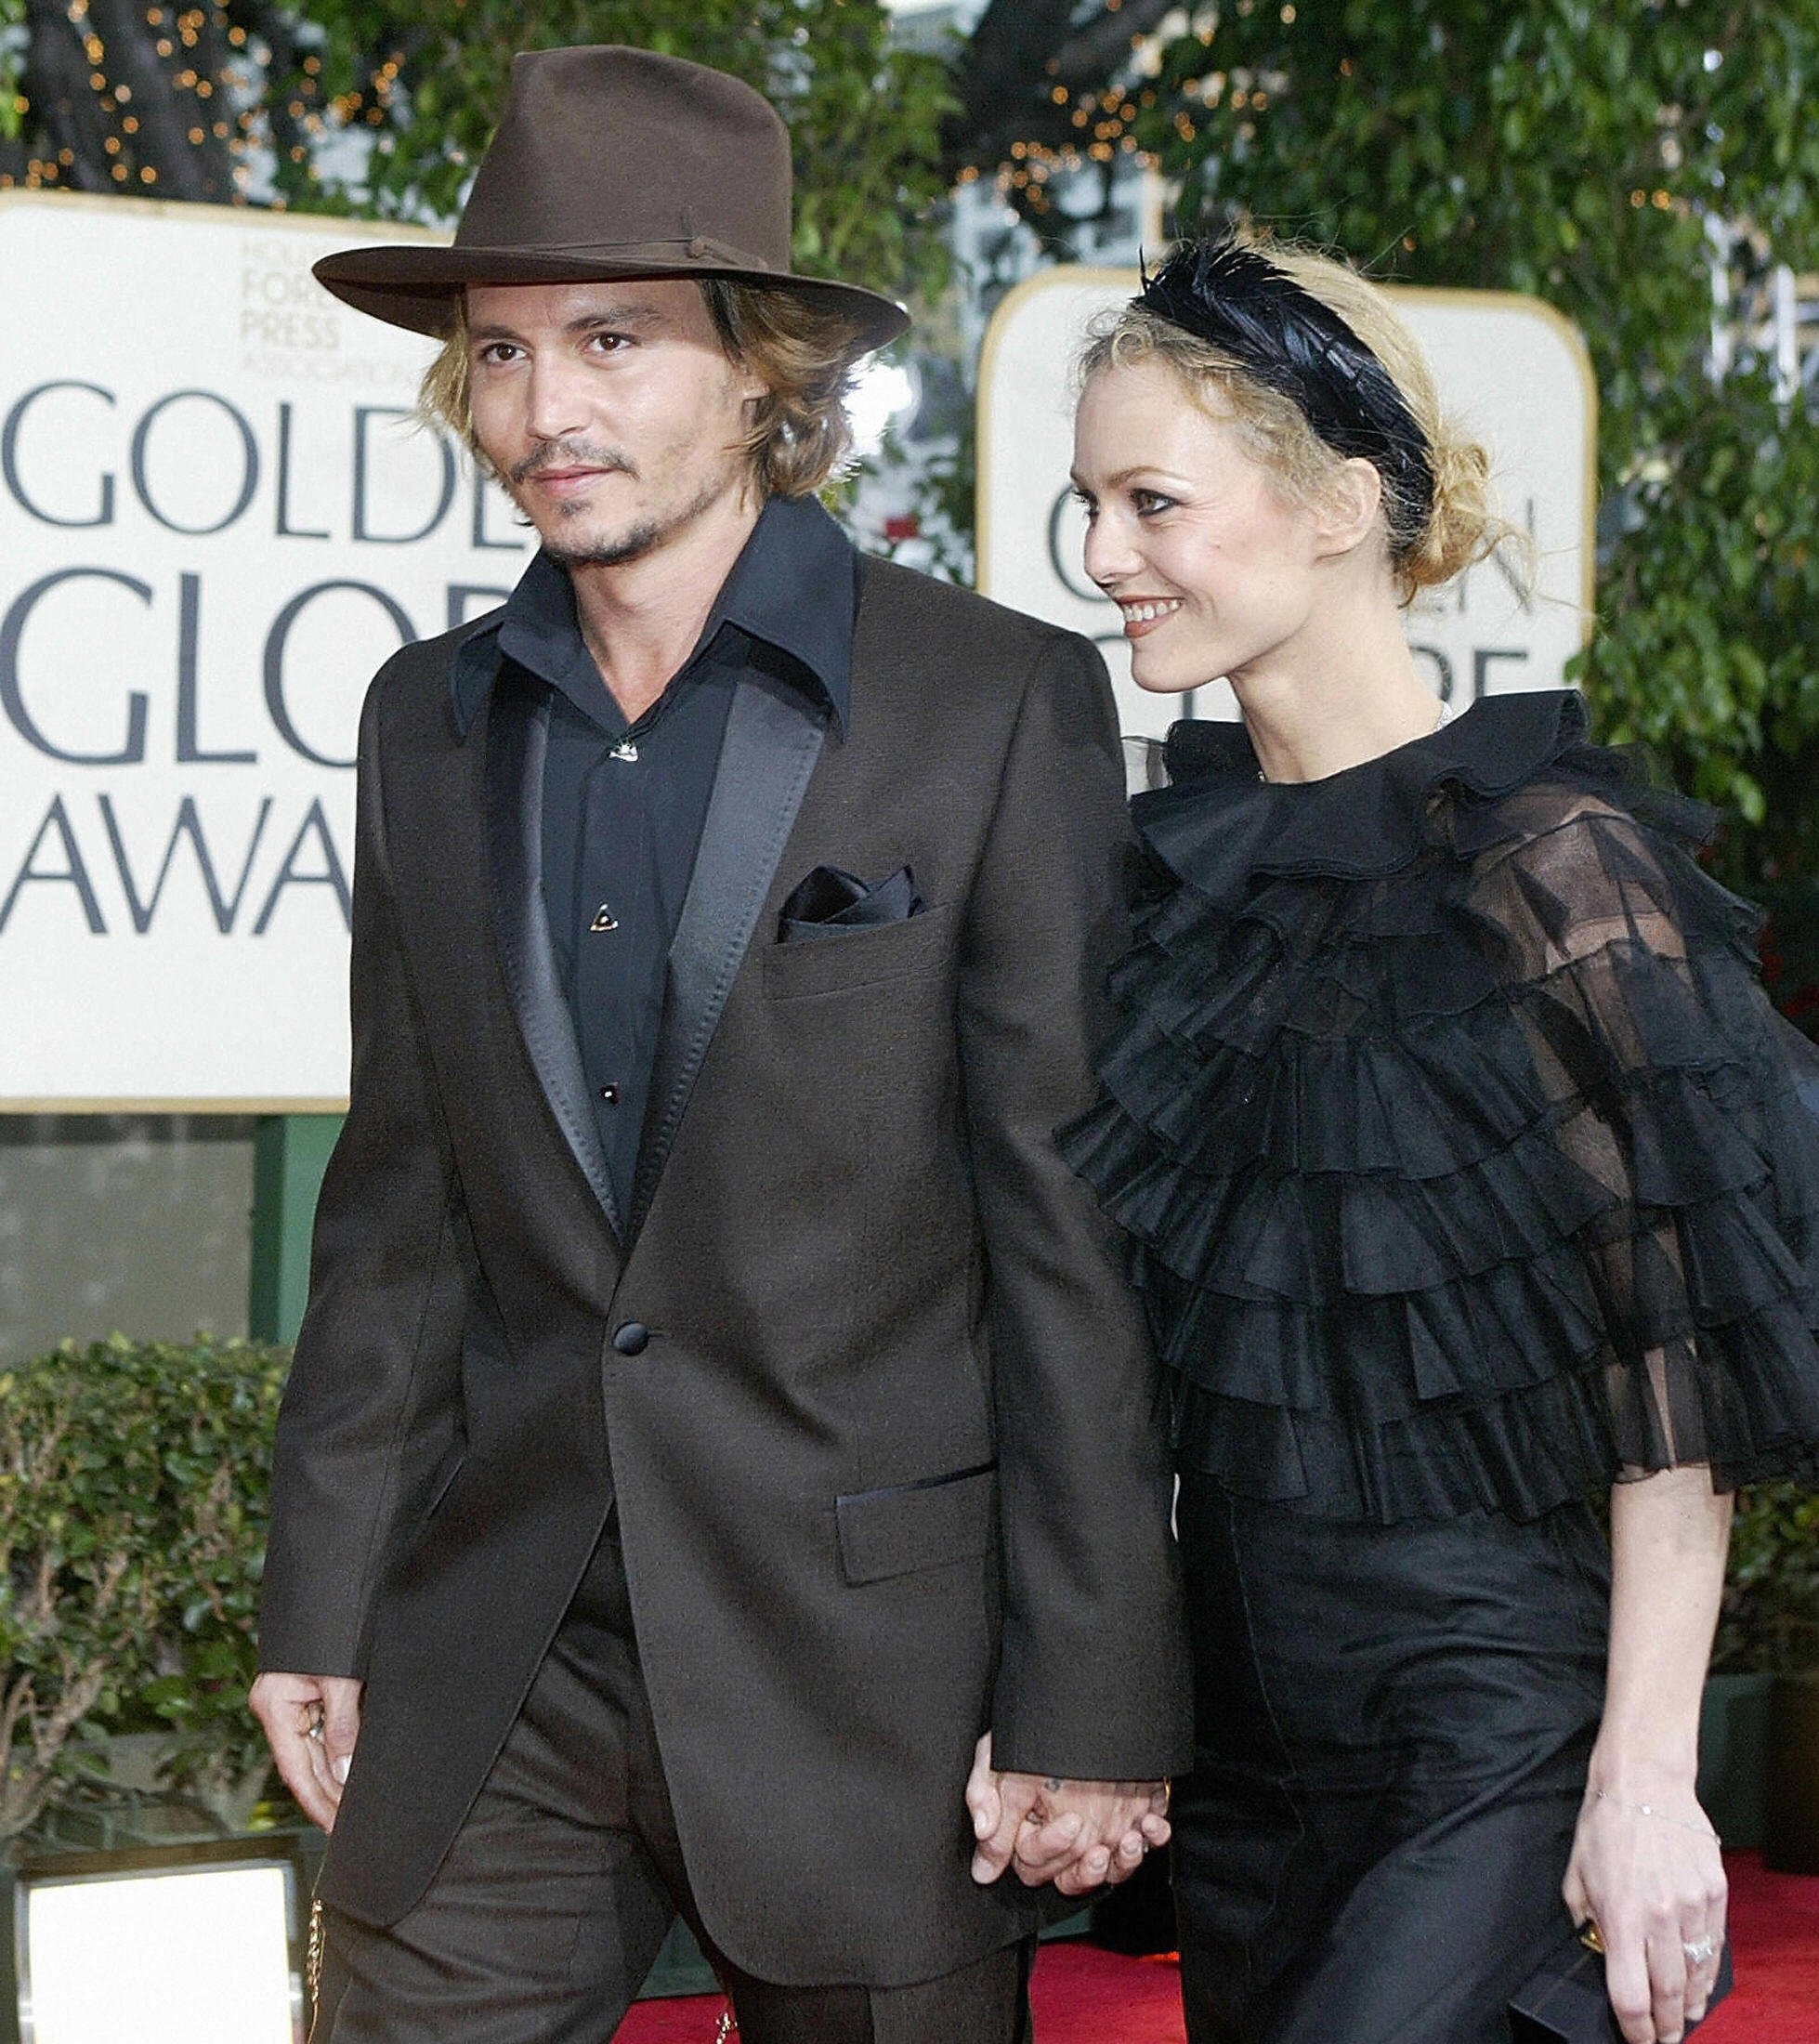 Johnny Depp and French singer Vanessa Paradis arriving for the 61st Golden Globe awards on January 25, 2004 in Beverly Hills, California. / Source: Getty Images